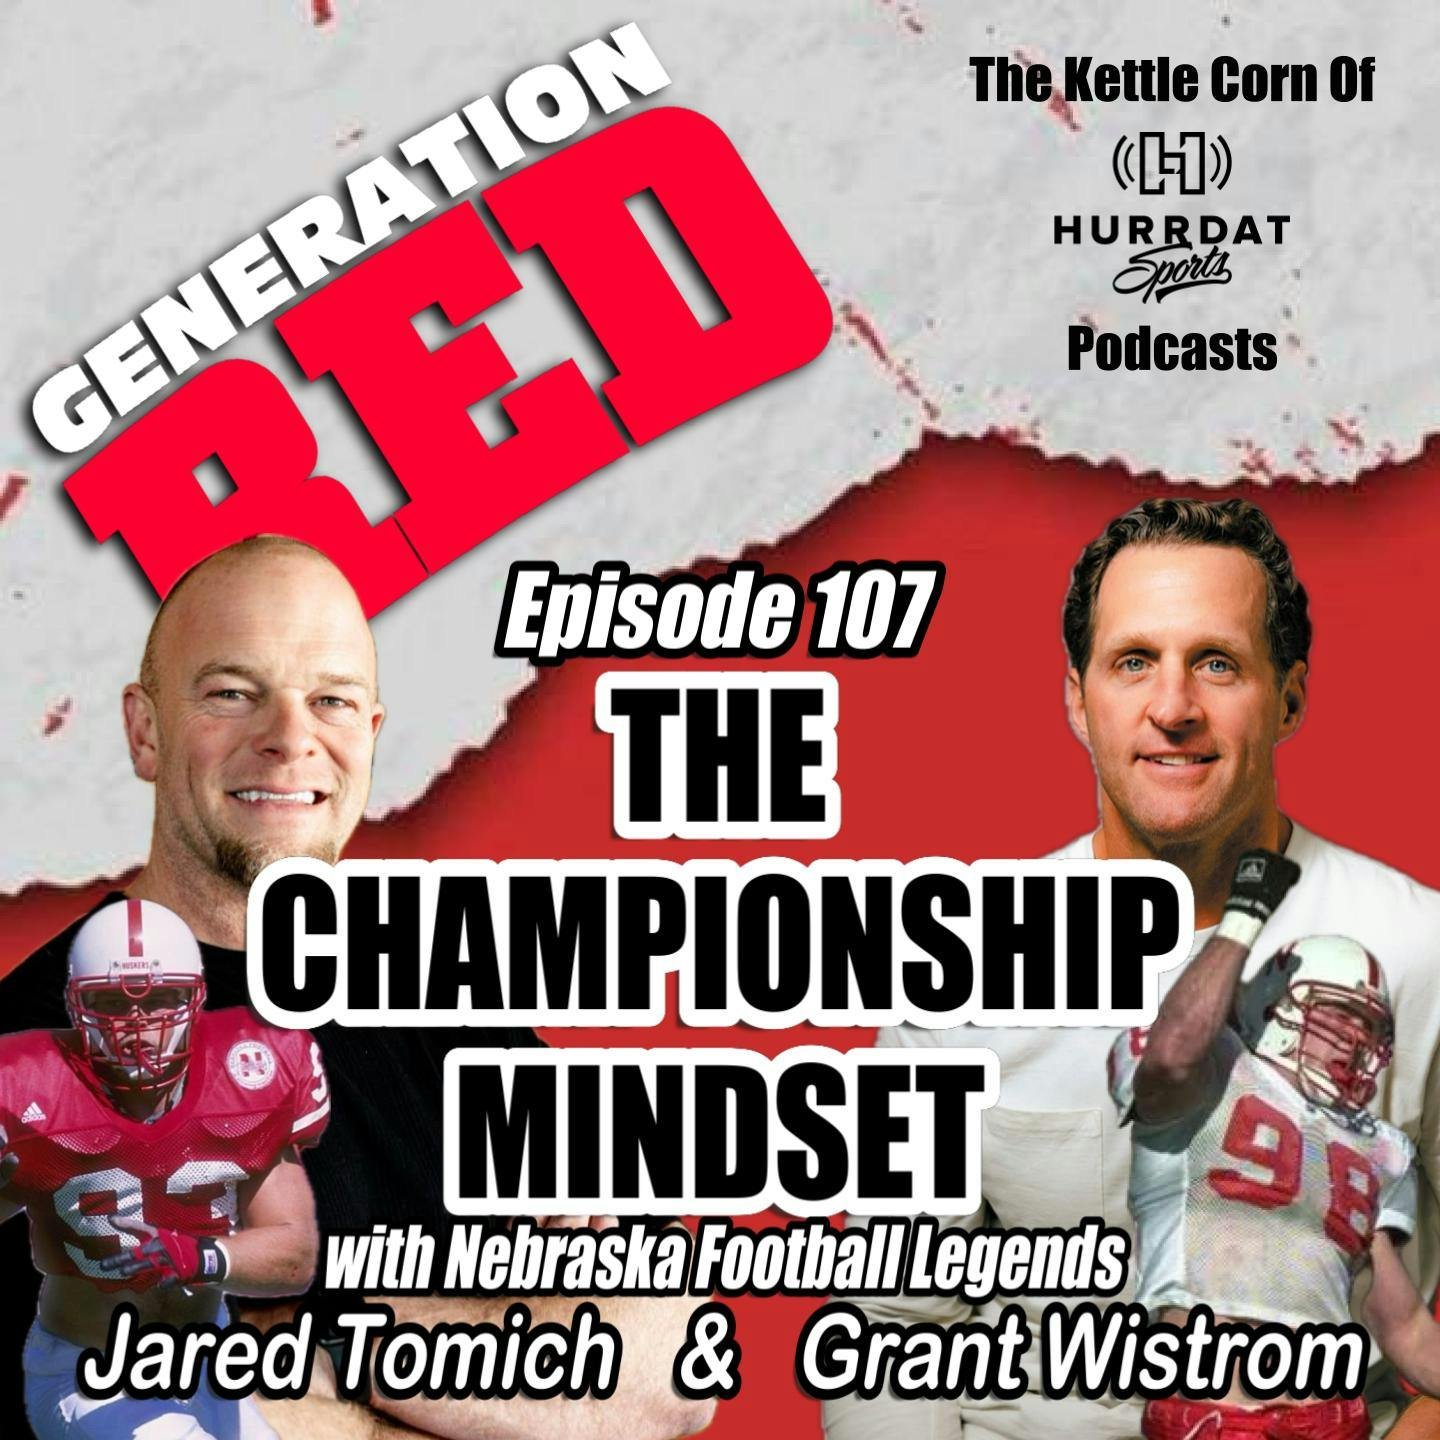 The Championship Mindset - A Conversation with Husker Legends, Grant Wistrom & Jared Tomich